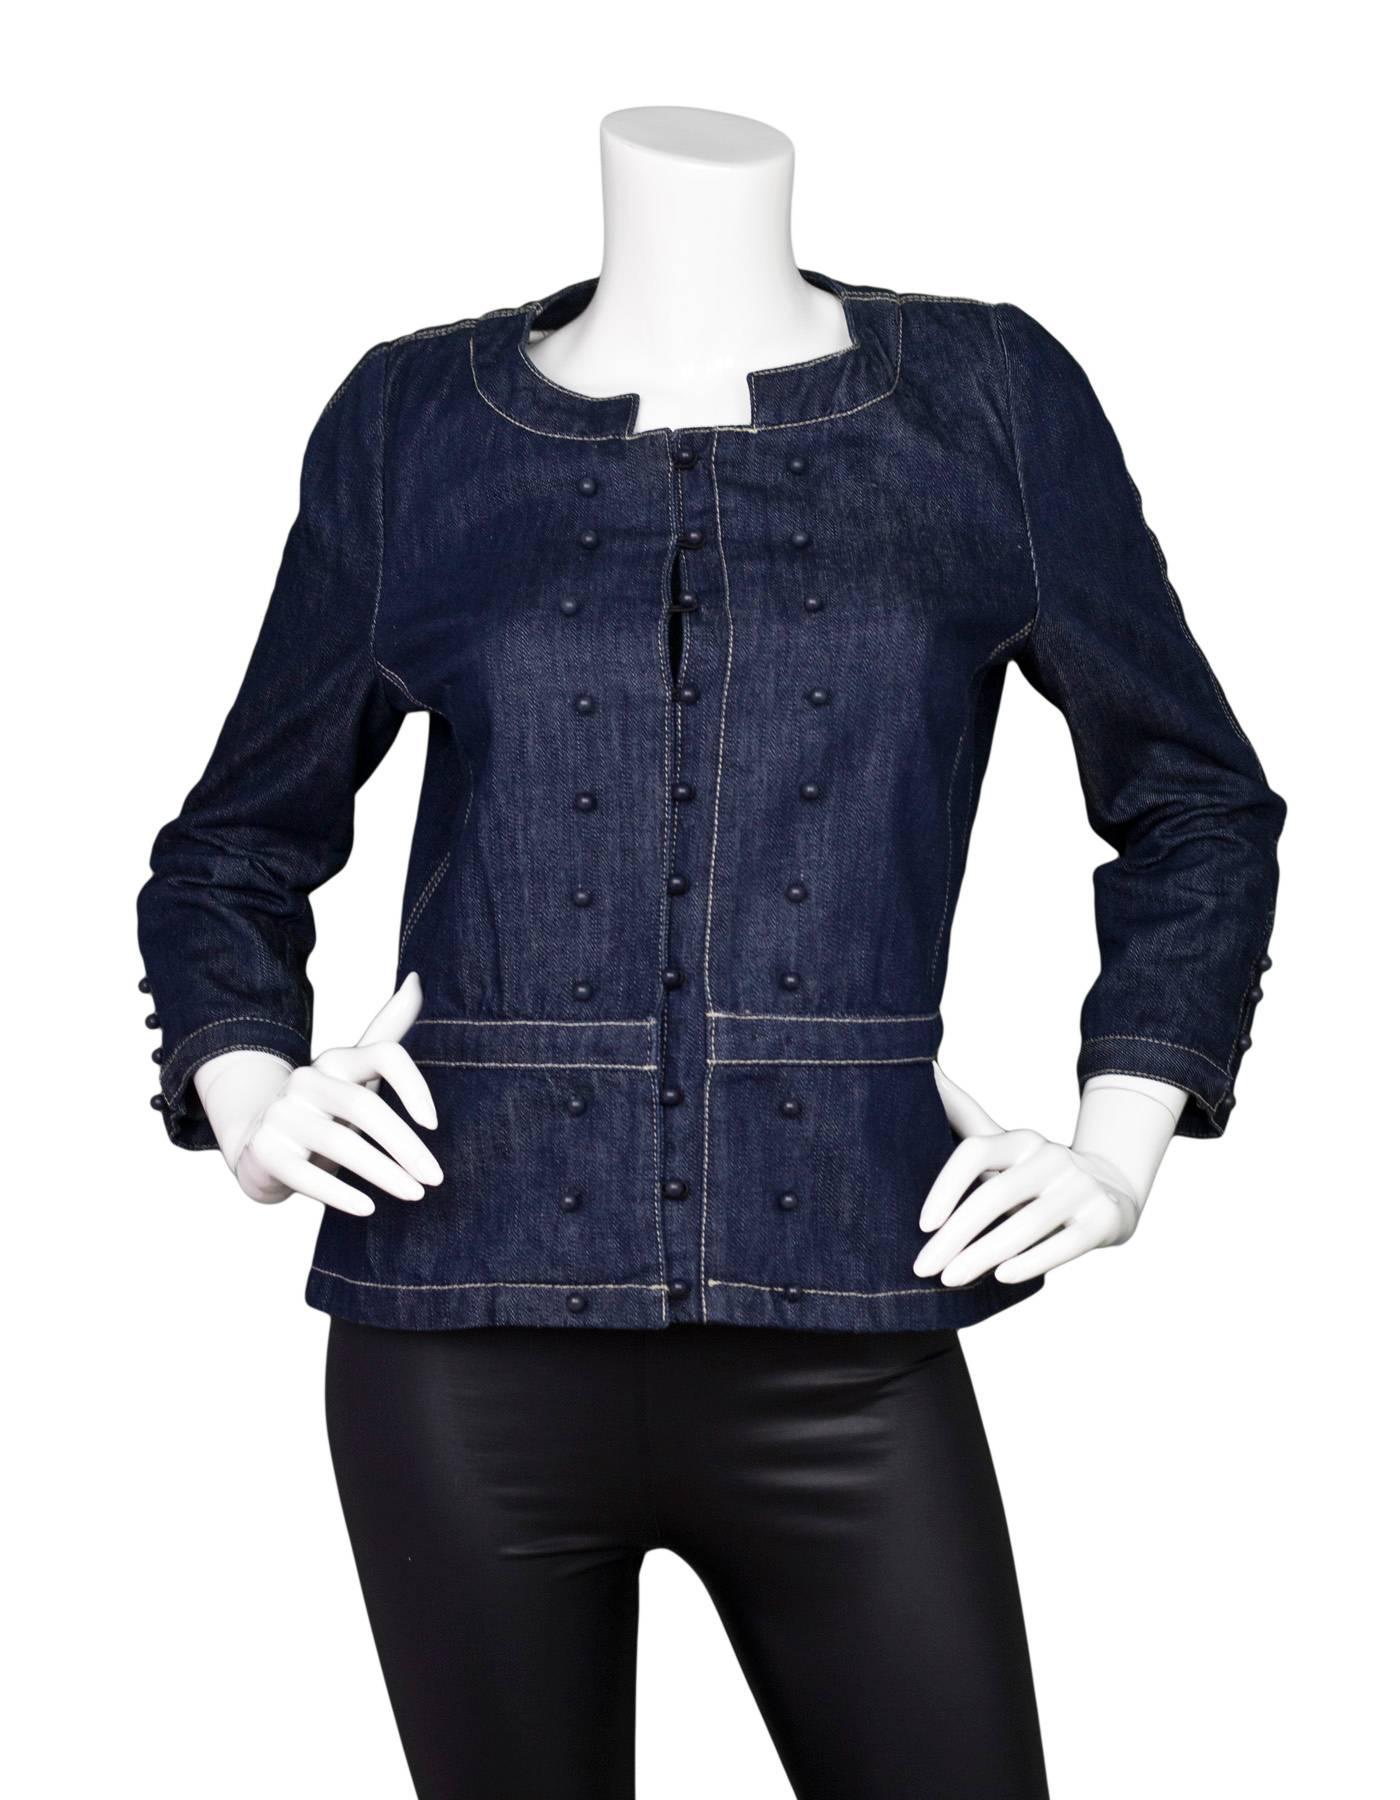 Loewe Triple Breasted Denim Jacket Sz M
Features peplum trim

Made In: Spain
Color: Blue
Composition: 100% Cotton
Lining: None
Closure/Opening: Button closure
Exterior Pockets: None
Overall Condition: Excellent pre-owned condition

Marked Size: